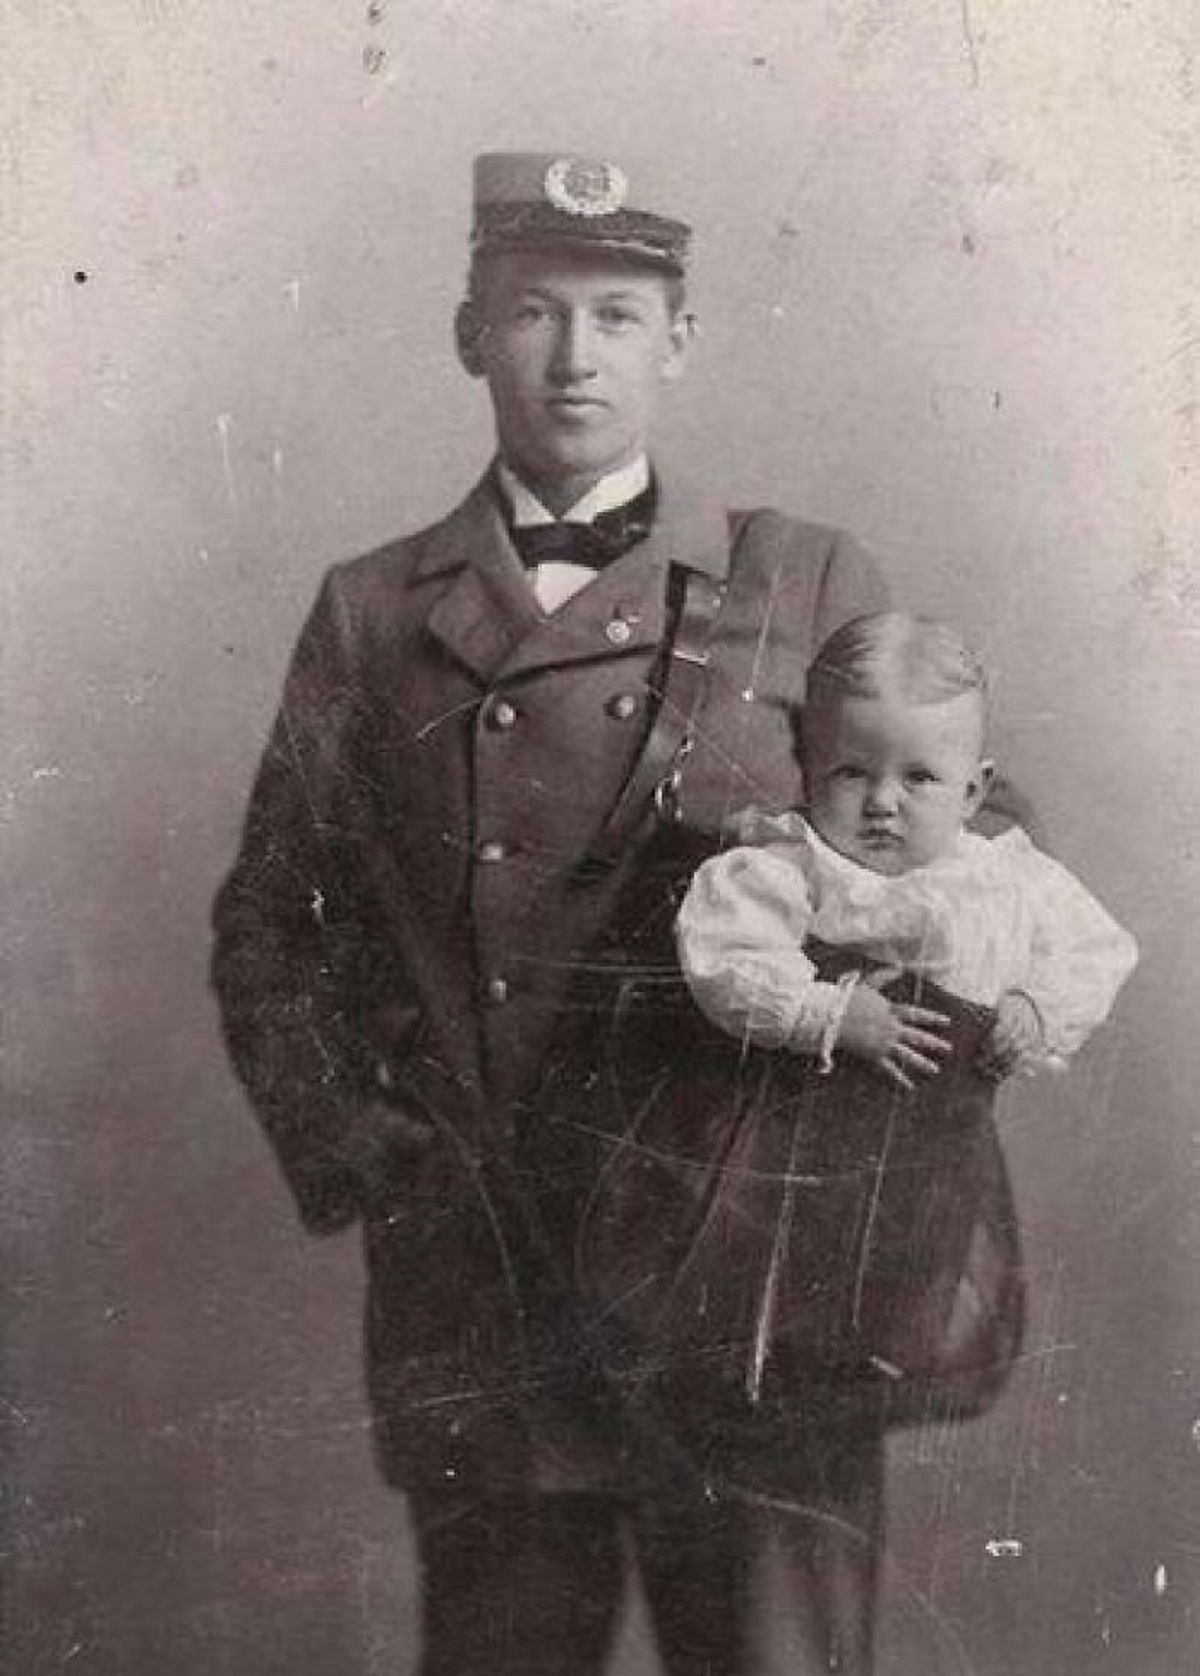 Sent The Crumb-Snatcher To Gramma's! A Postman With A Baby In His Mailbag When It Was Possible And Legal To Send Children Through The U.S. Postal Service, 1913